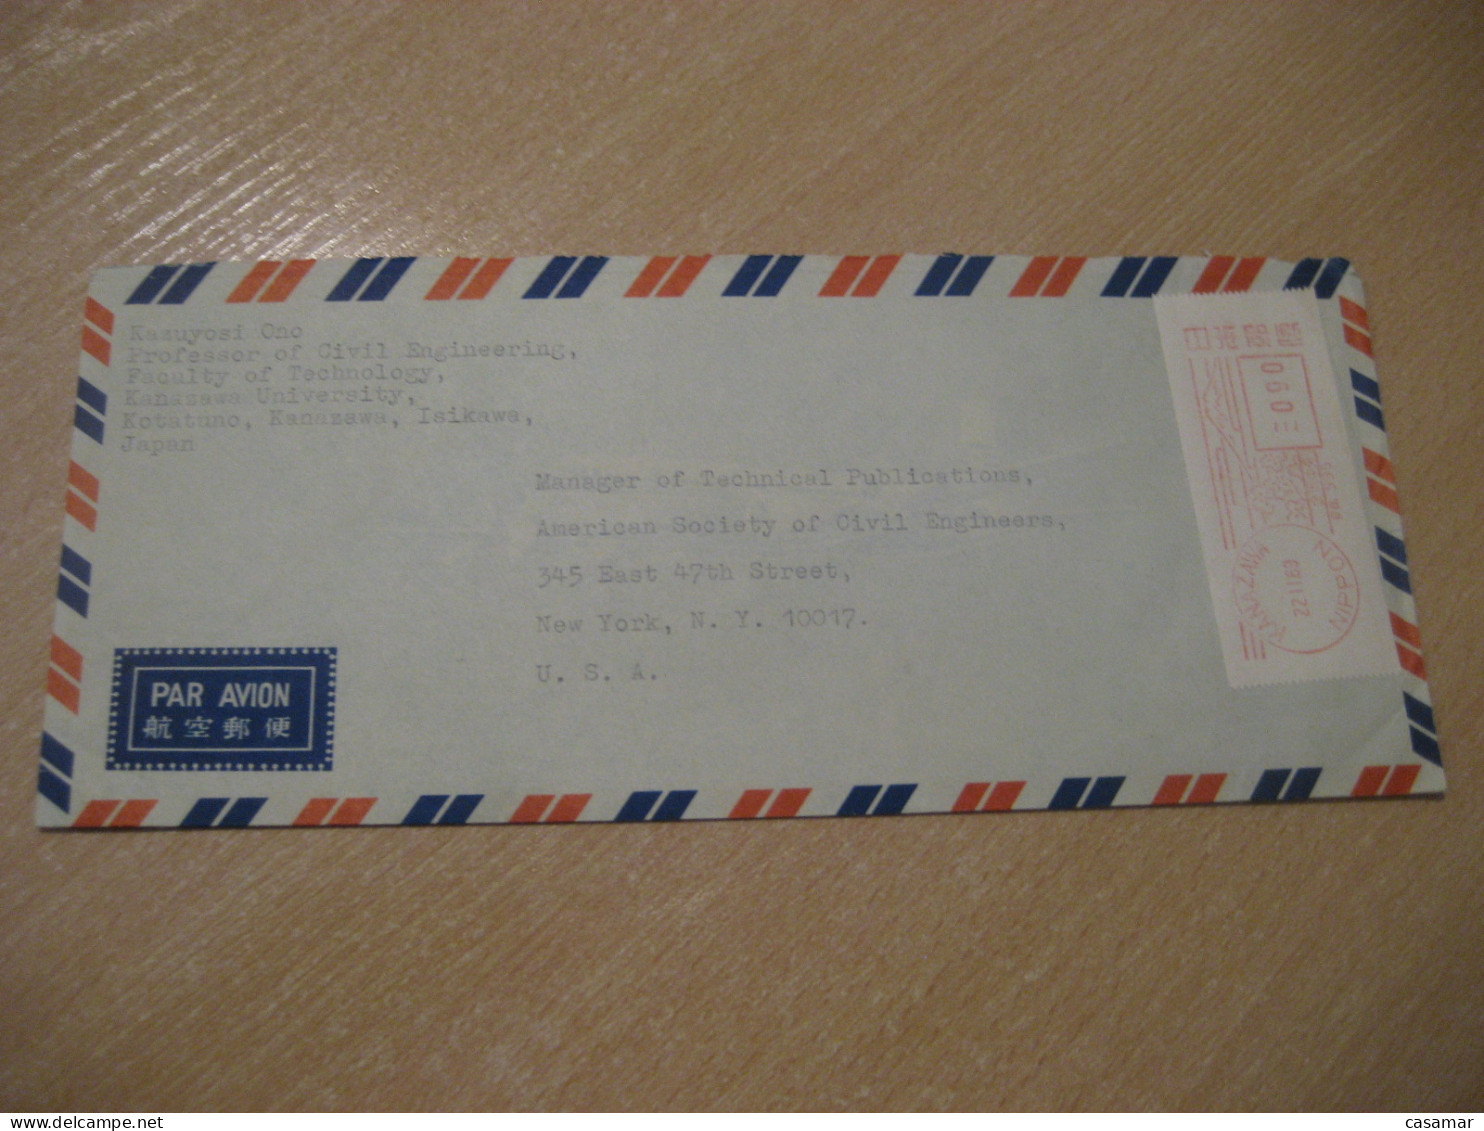 KANAZAWA 1969 To NY USA Vulcanologia Volcanology Volcano Volcan Geology Geologie Meter Mail Cancel Cover JAPAN - Volcanes